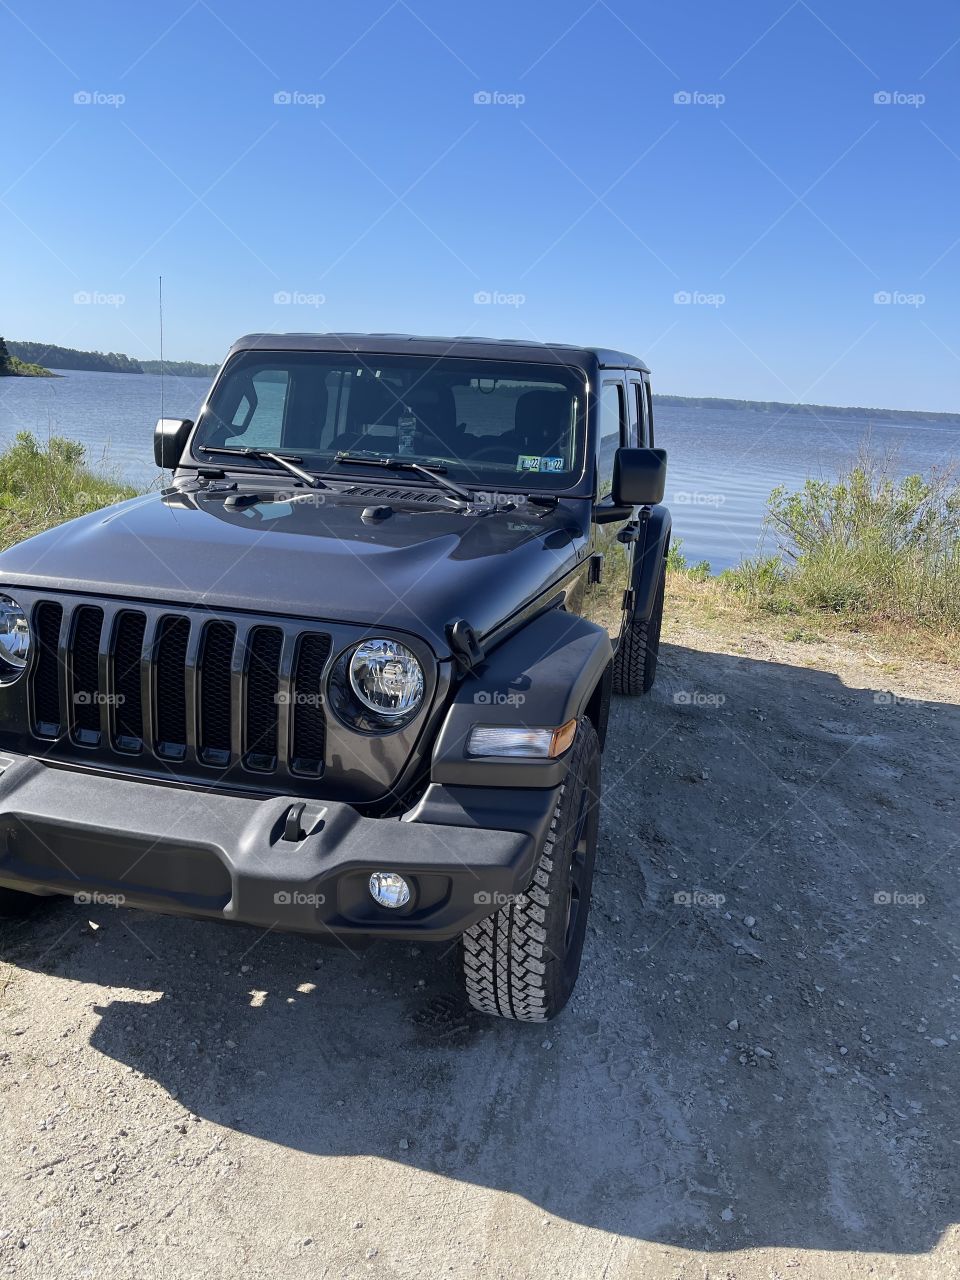 Jeep next to the ocean